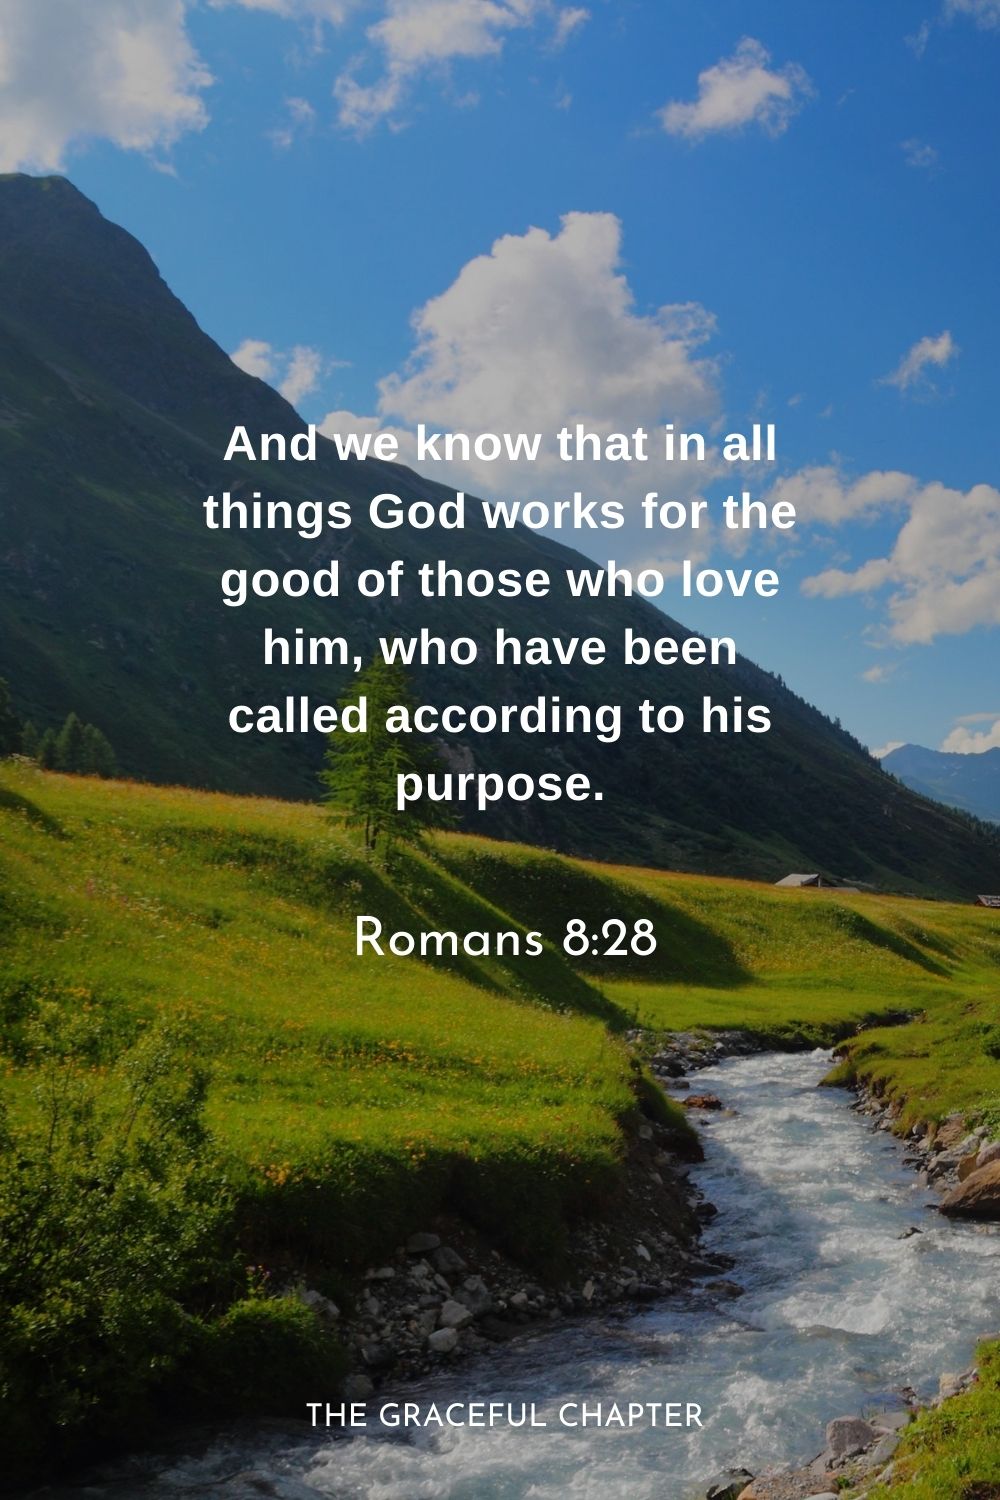 And we know that in all things God works for the good of those who love him, who have been called according to his purpose.